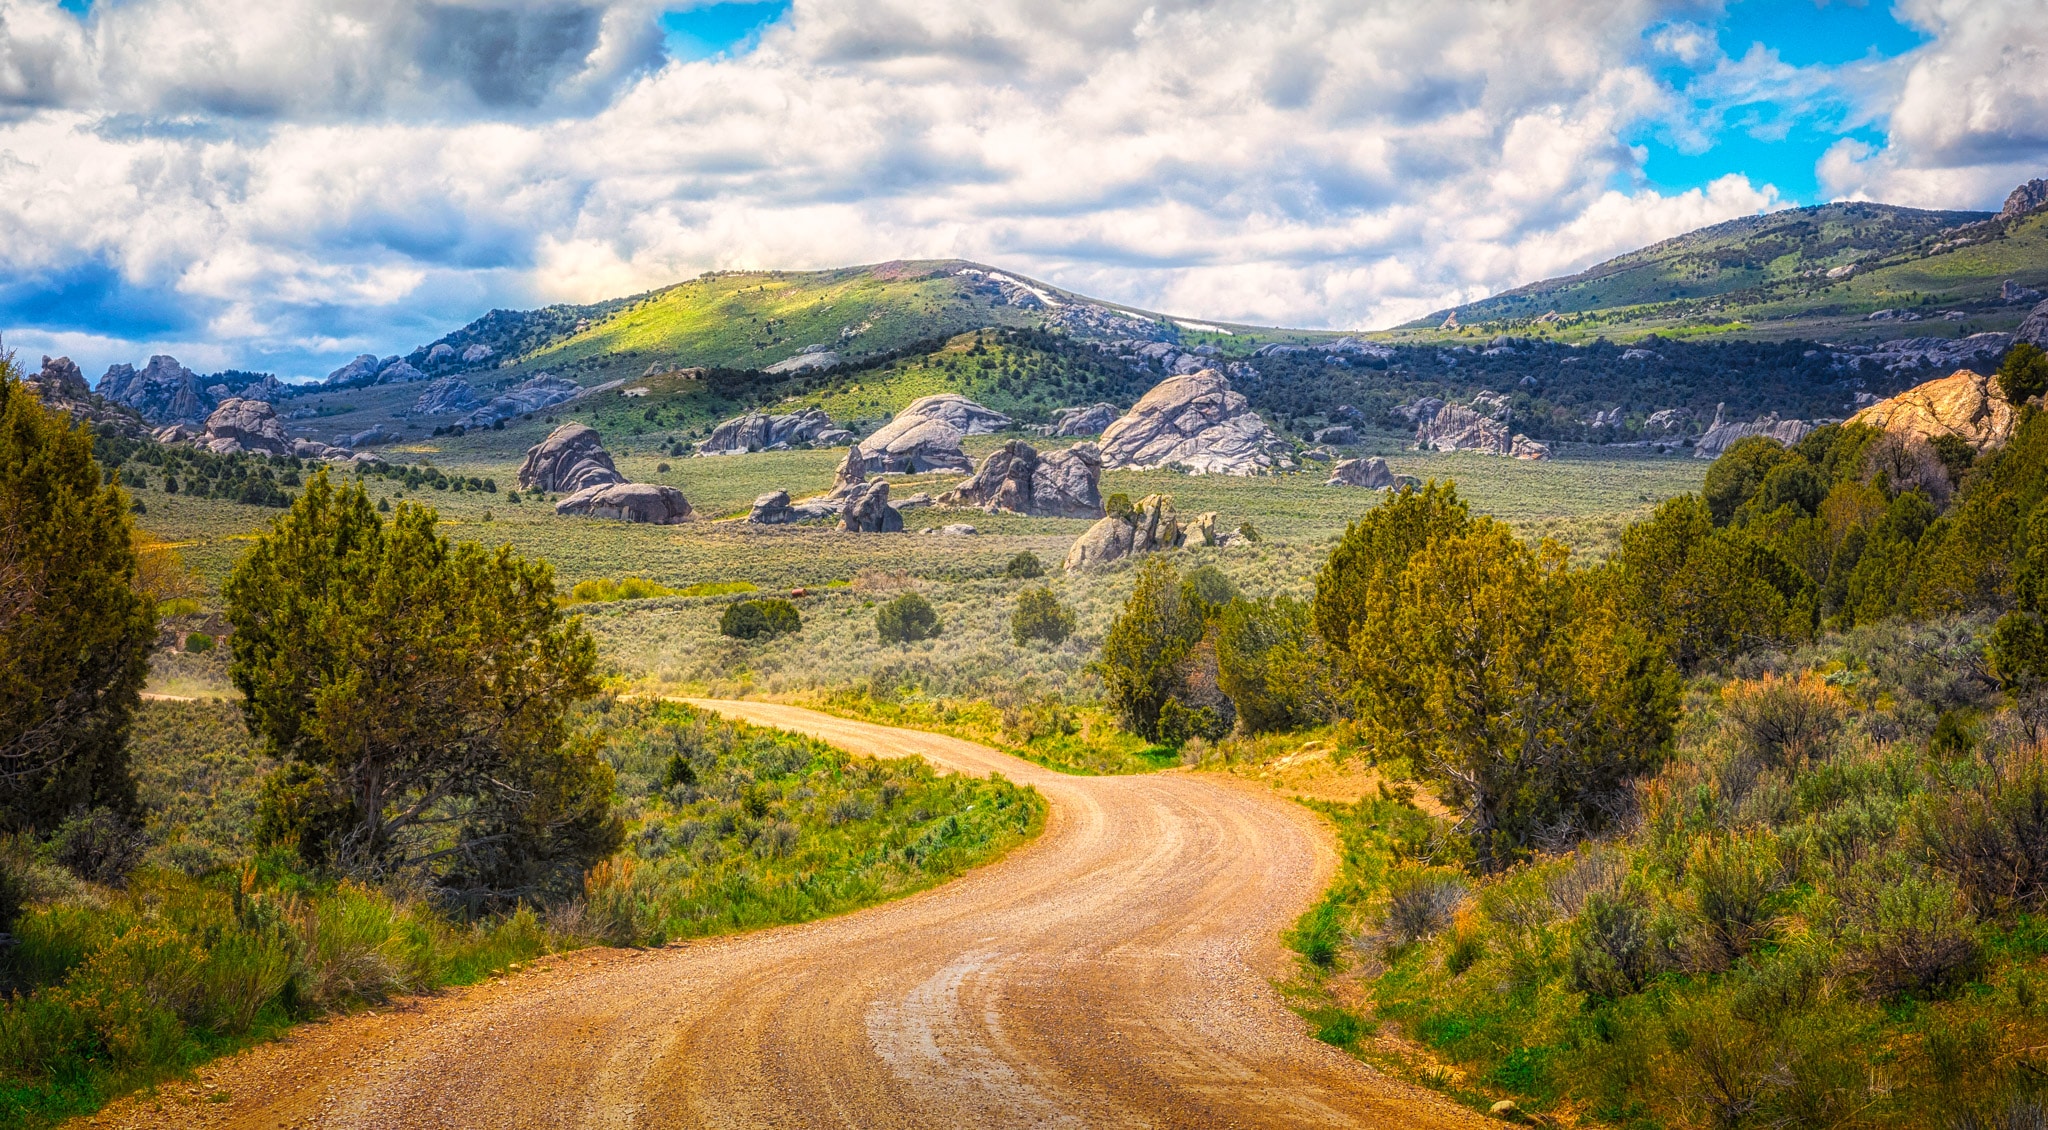 A dirt road winds through City of Rocks National Reserve, near Almo, Idaho.